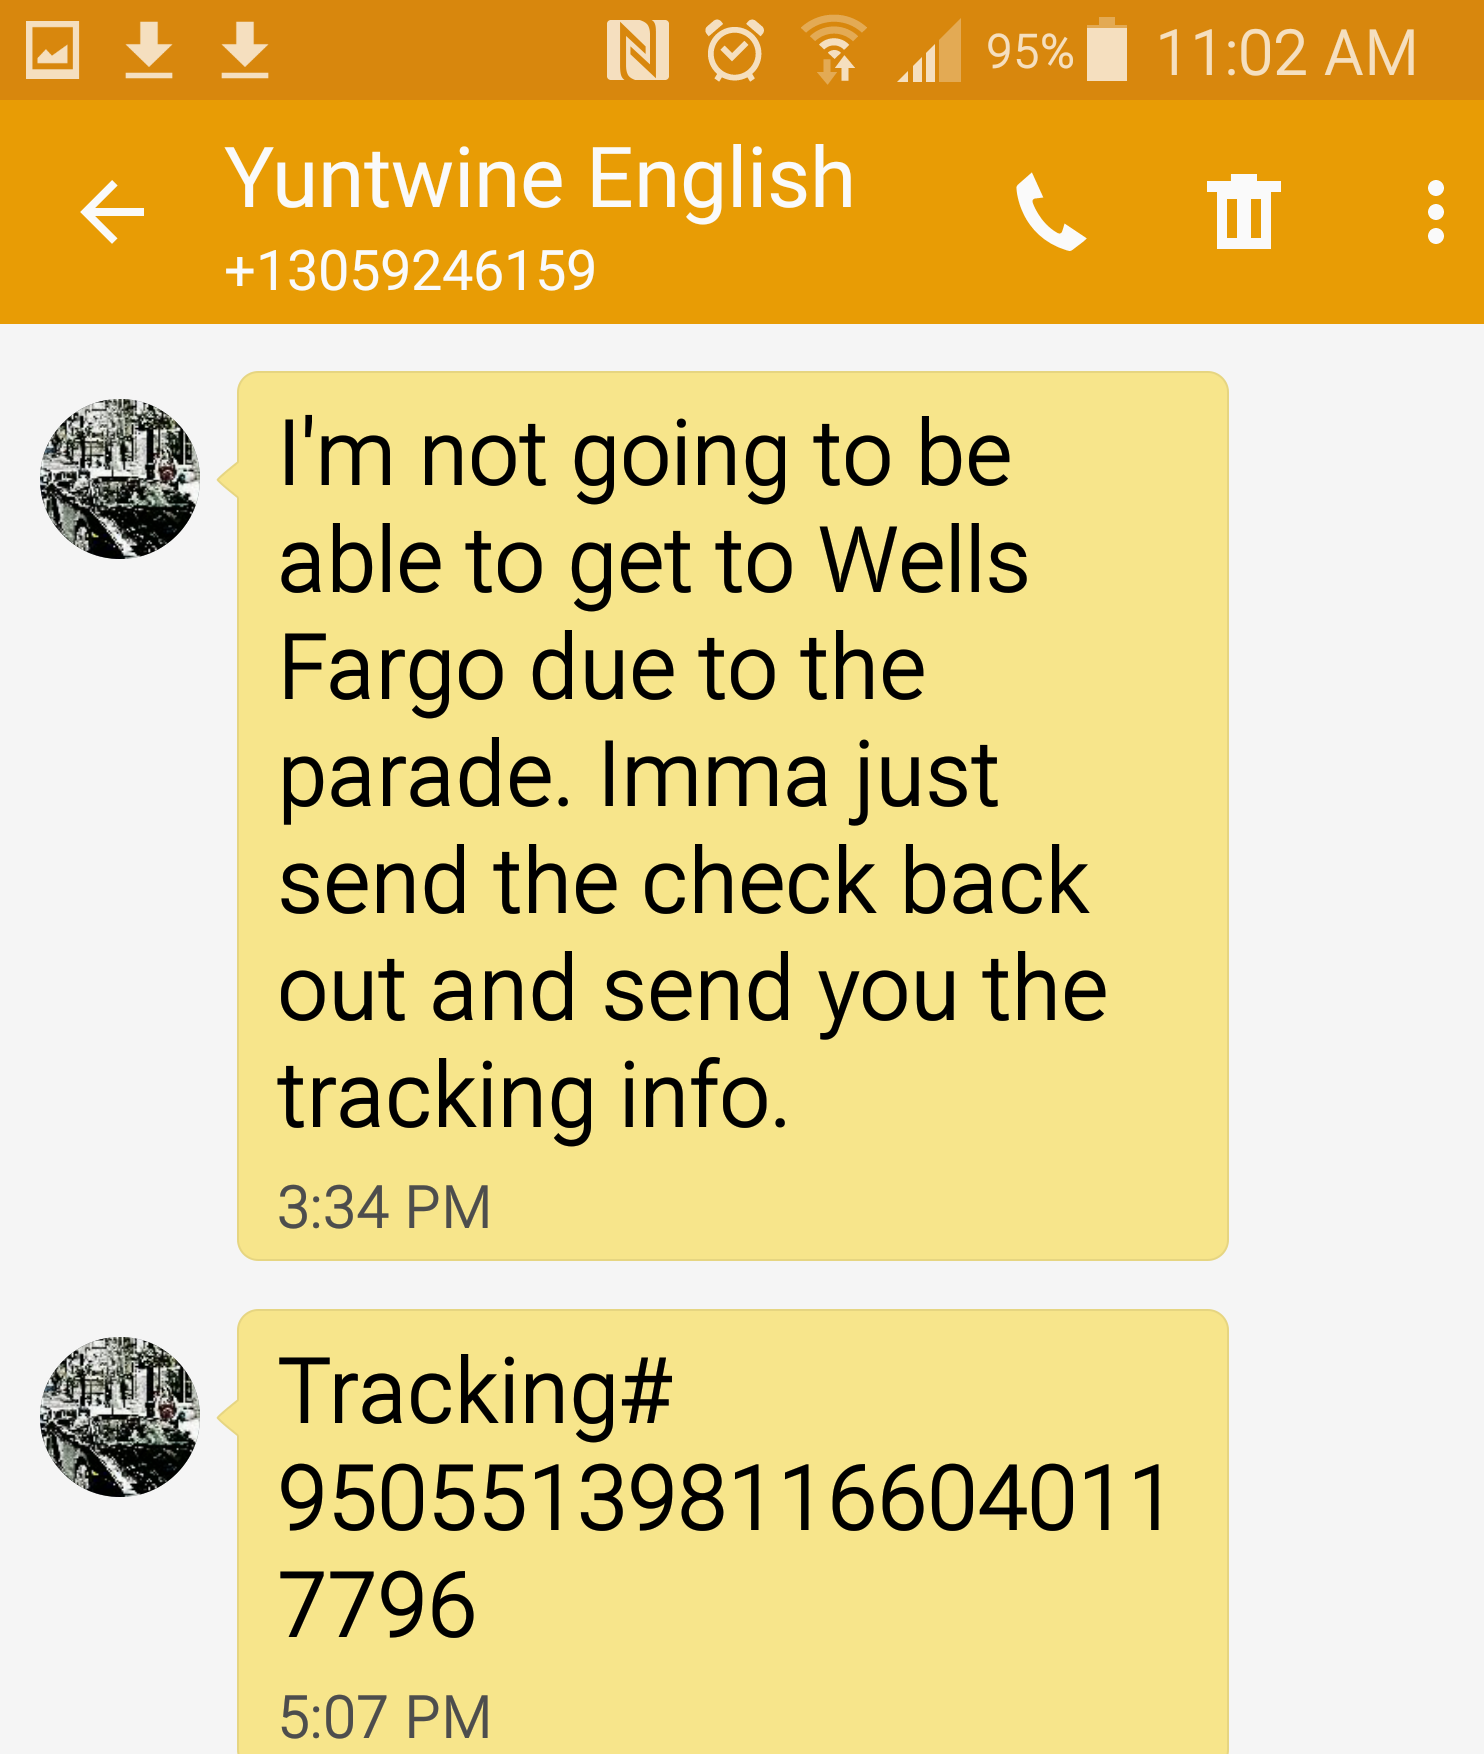 yuntwine stated he'd send money back after we found out he was a fraud